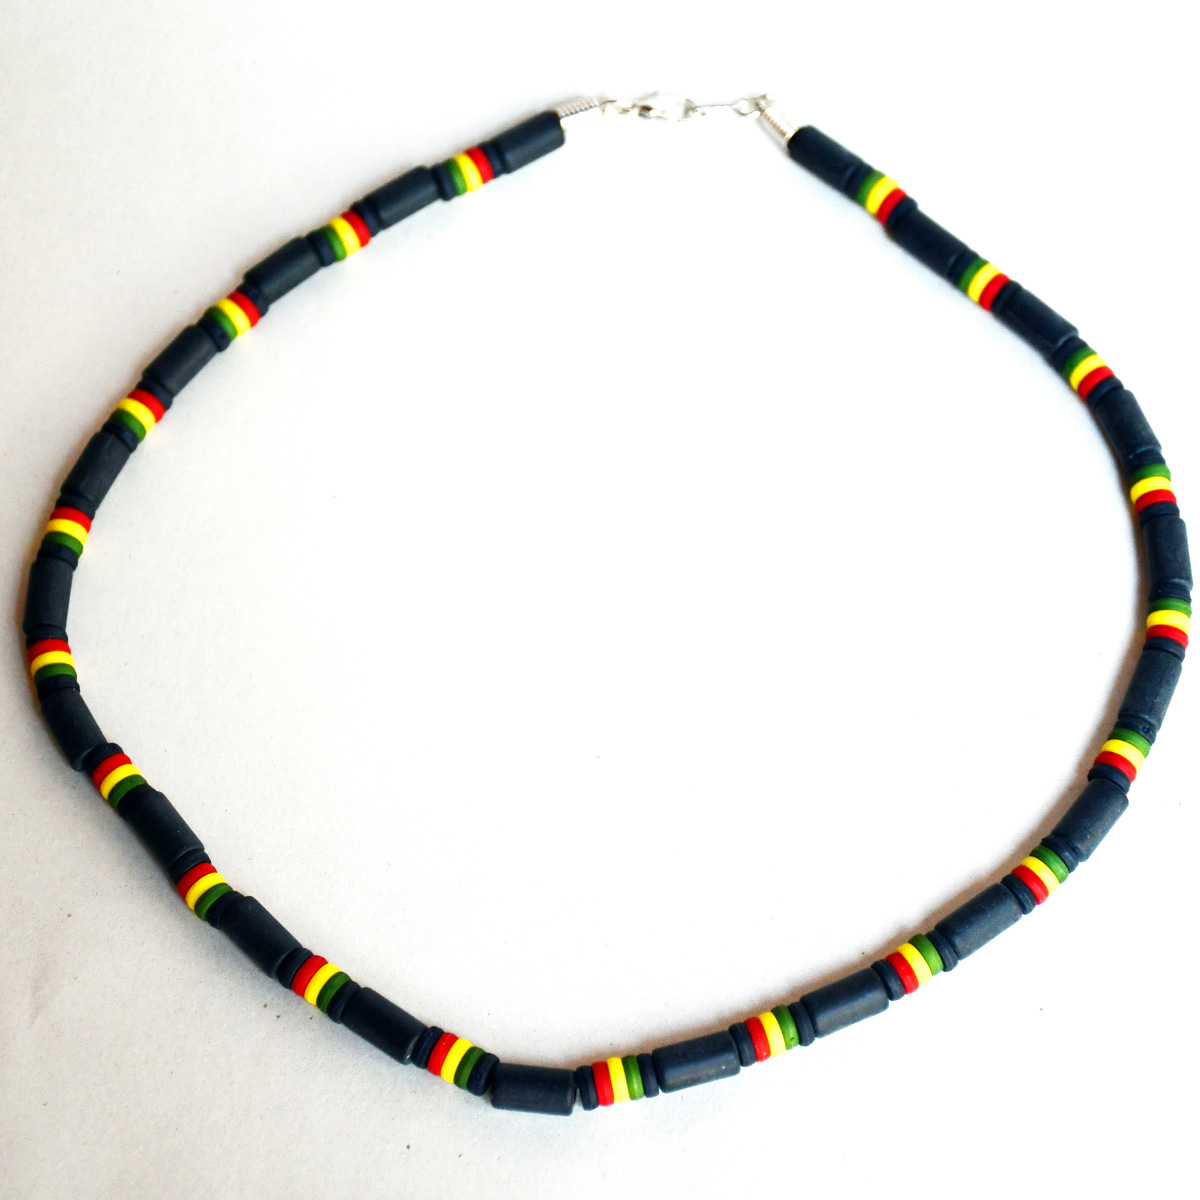 Black and Rasta Striped Beaded Necklace